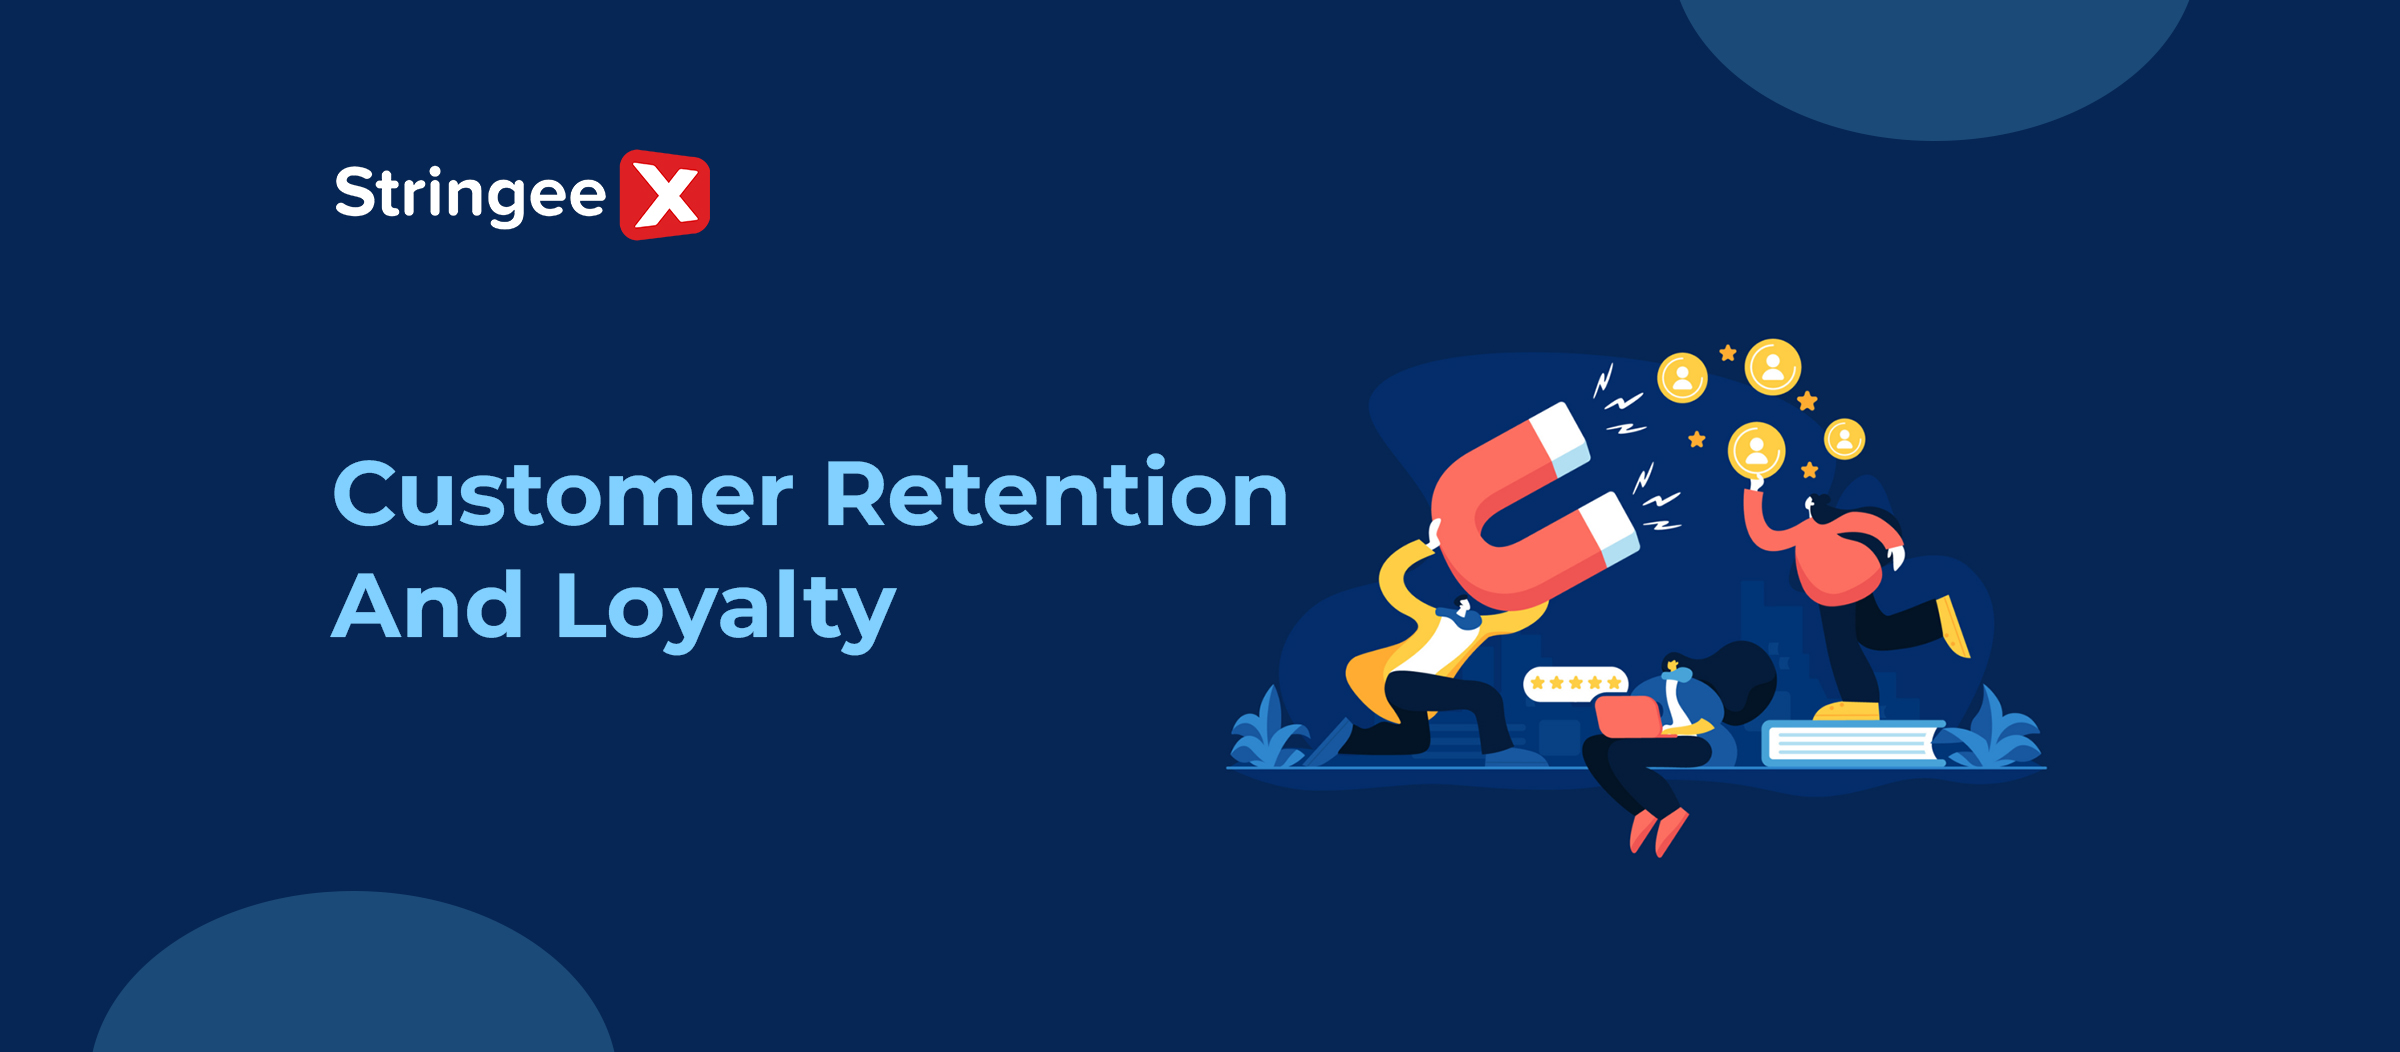 Customer Retention and Loyalty: What Is The Difference?